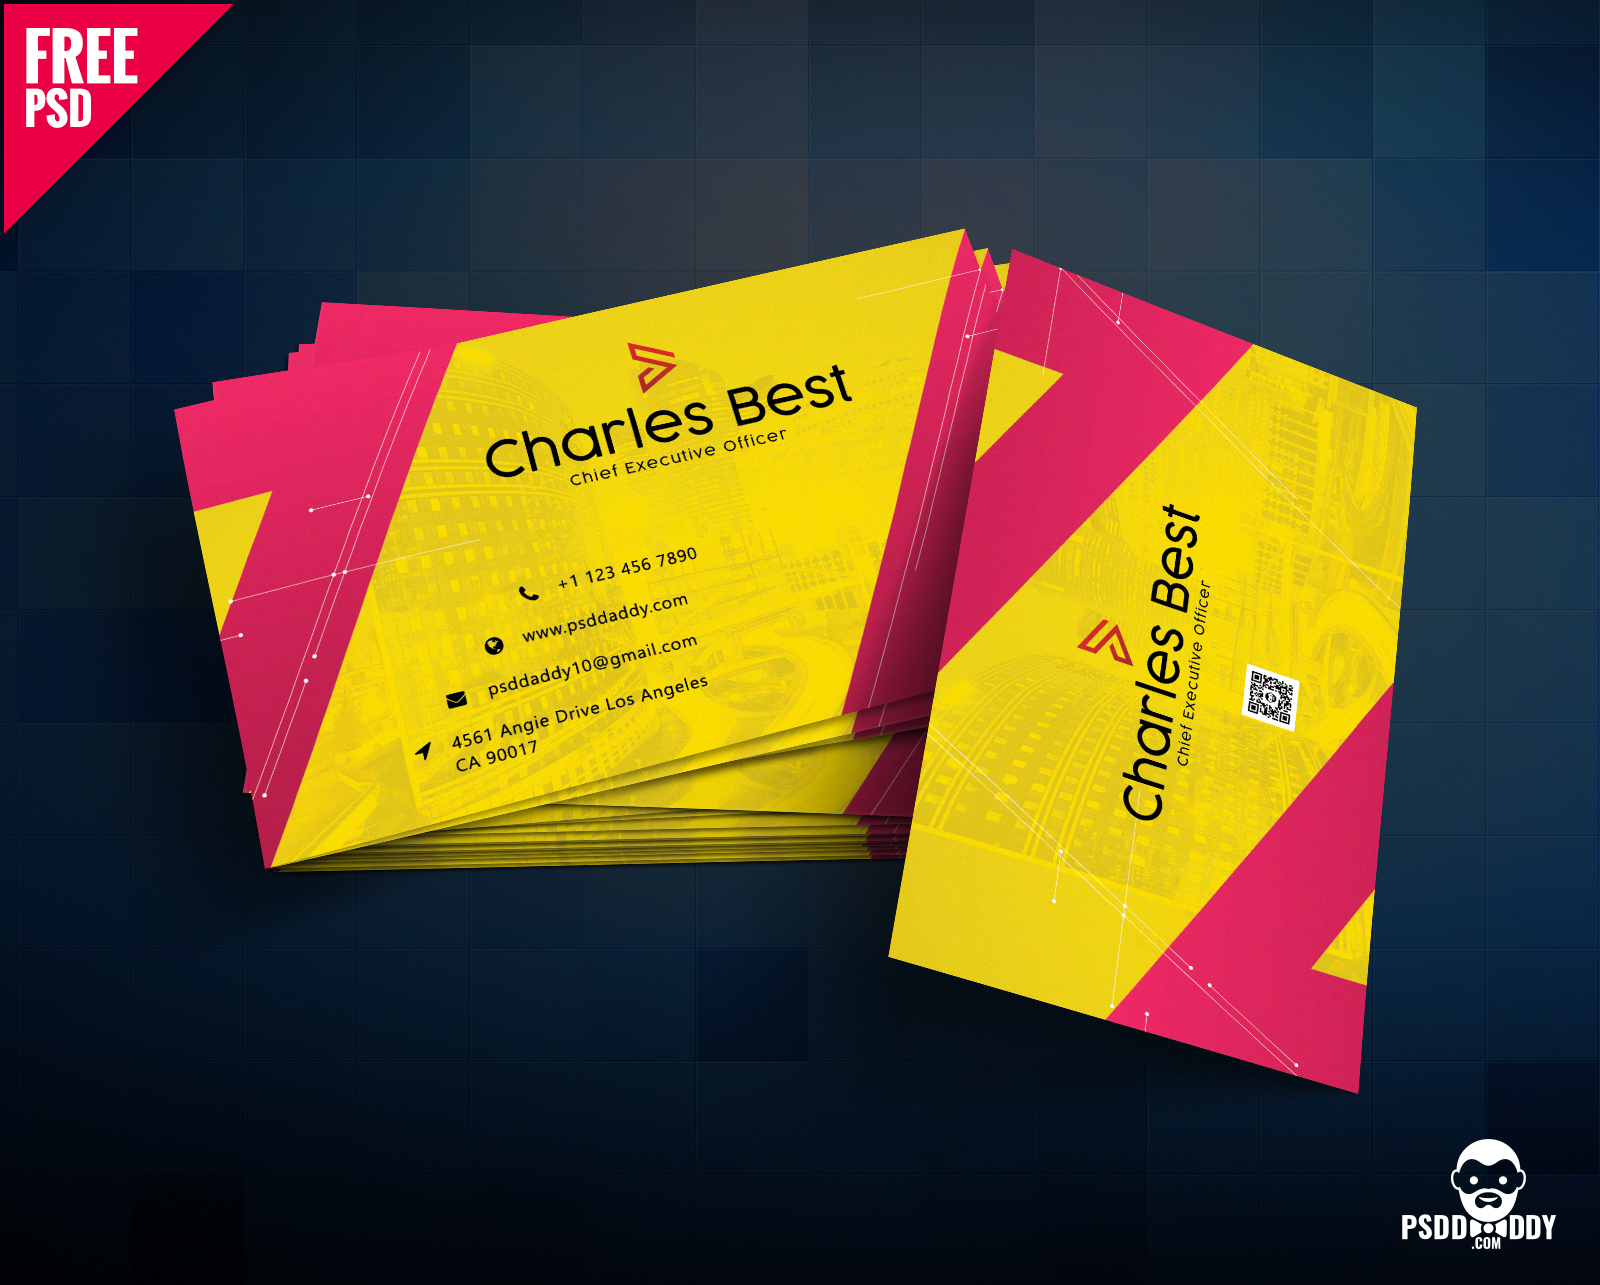 Download] Creative Business Card Free Psd | Psddaddy In Visiting Card Psd Template Free Download